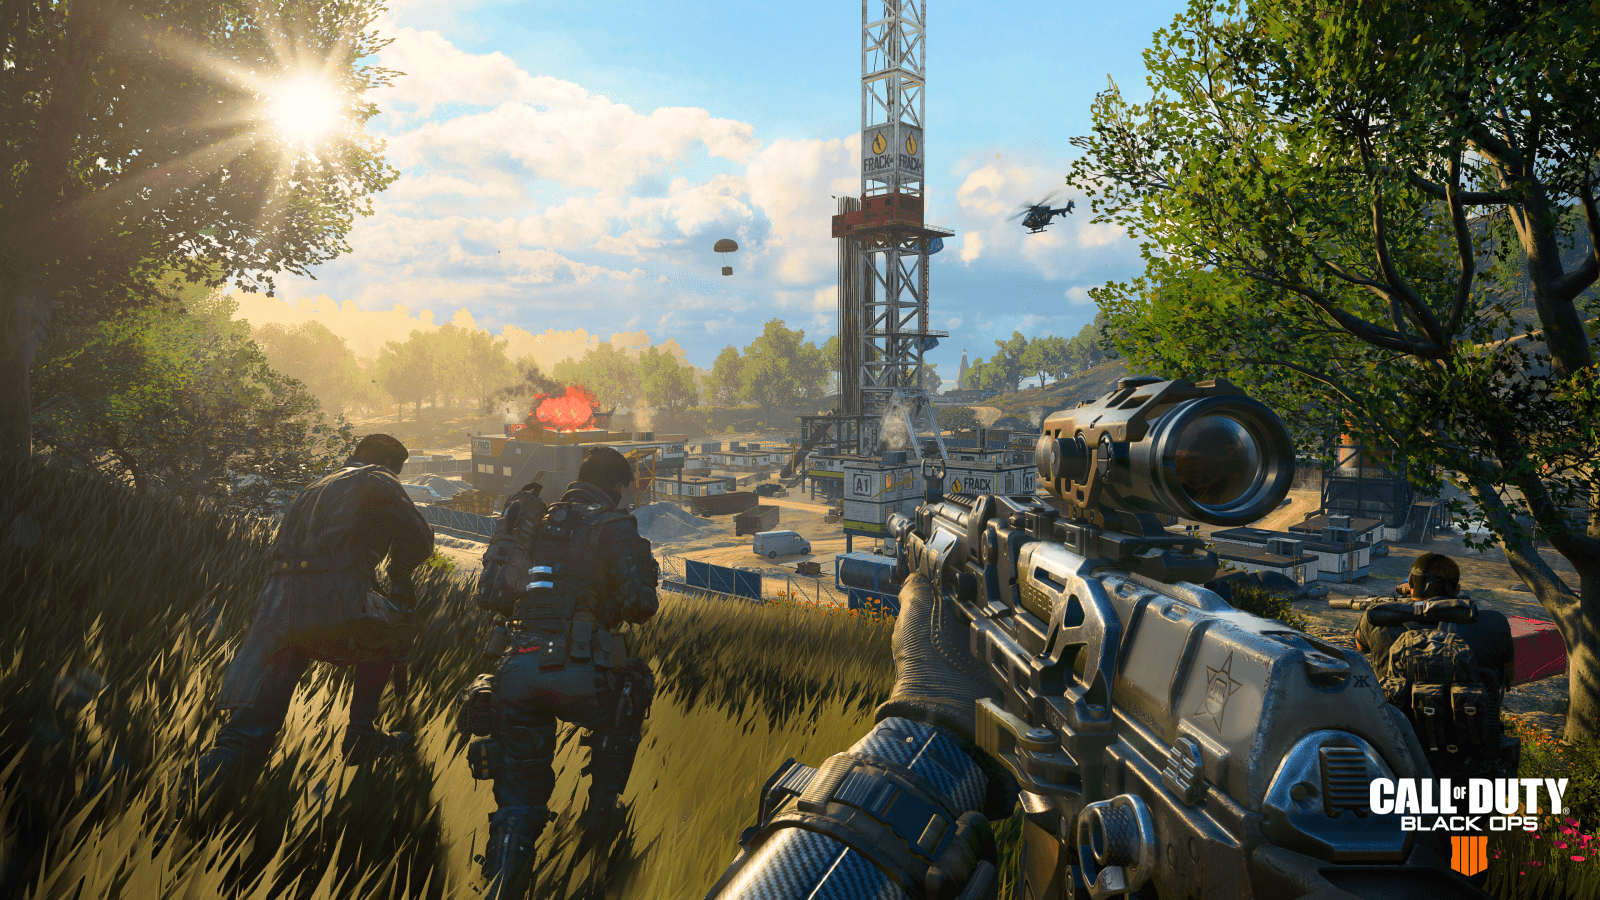 Call of Duty: Black Ops 4 takes on .qz.com